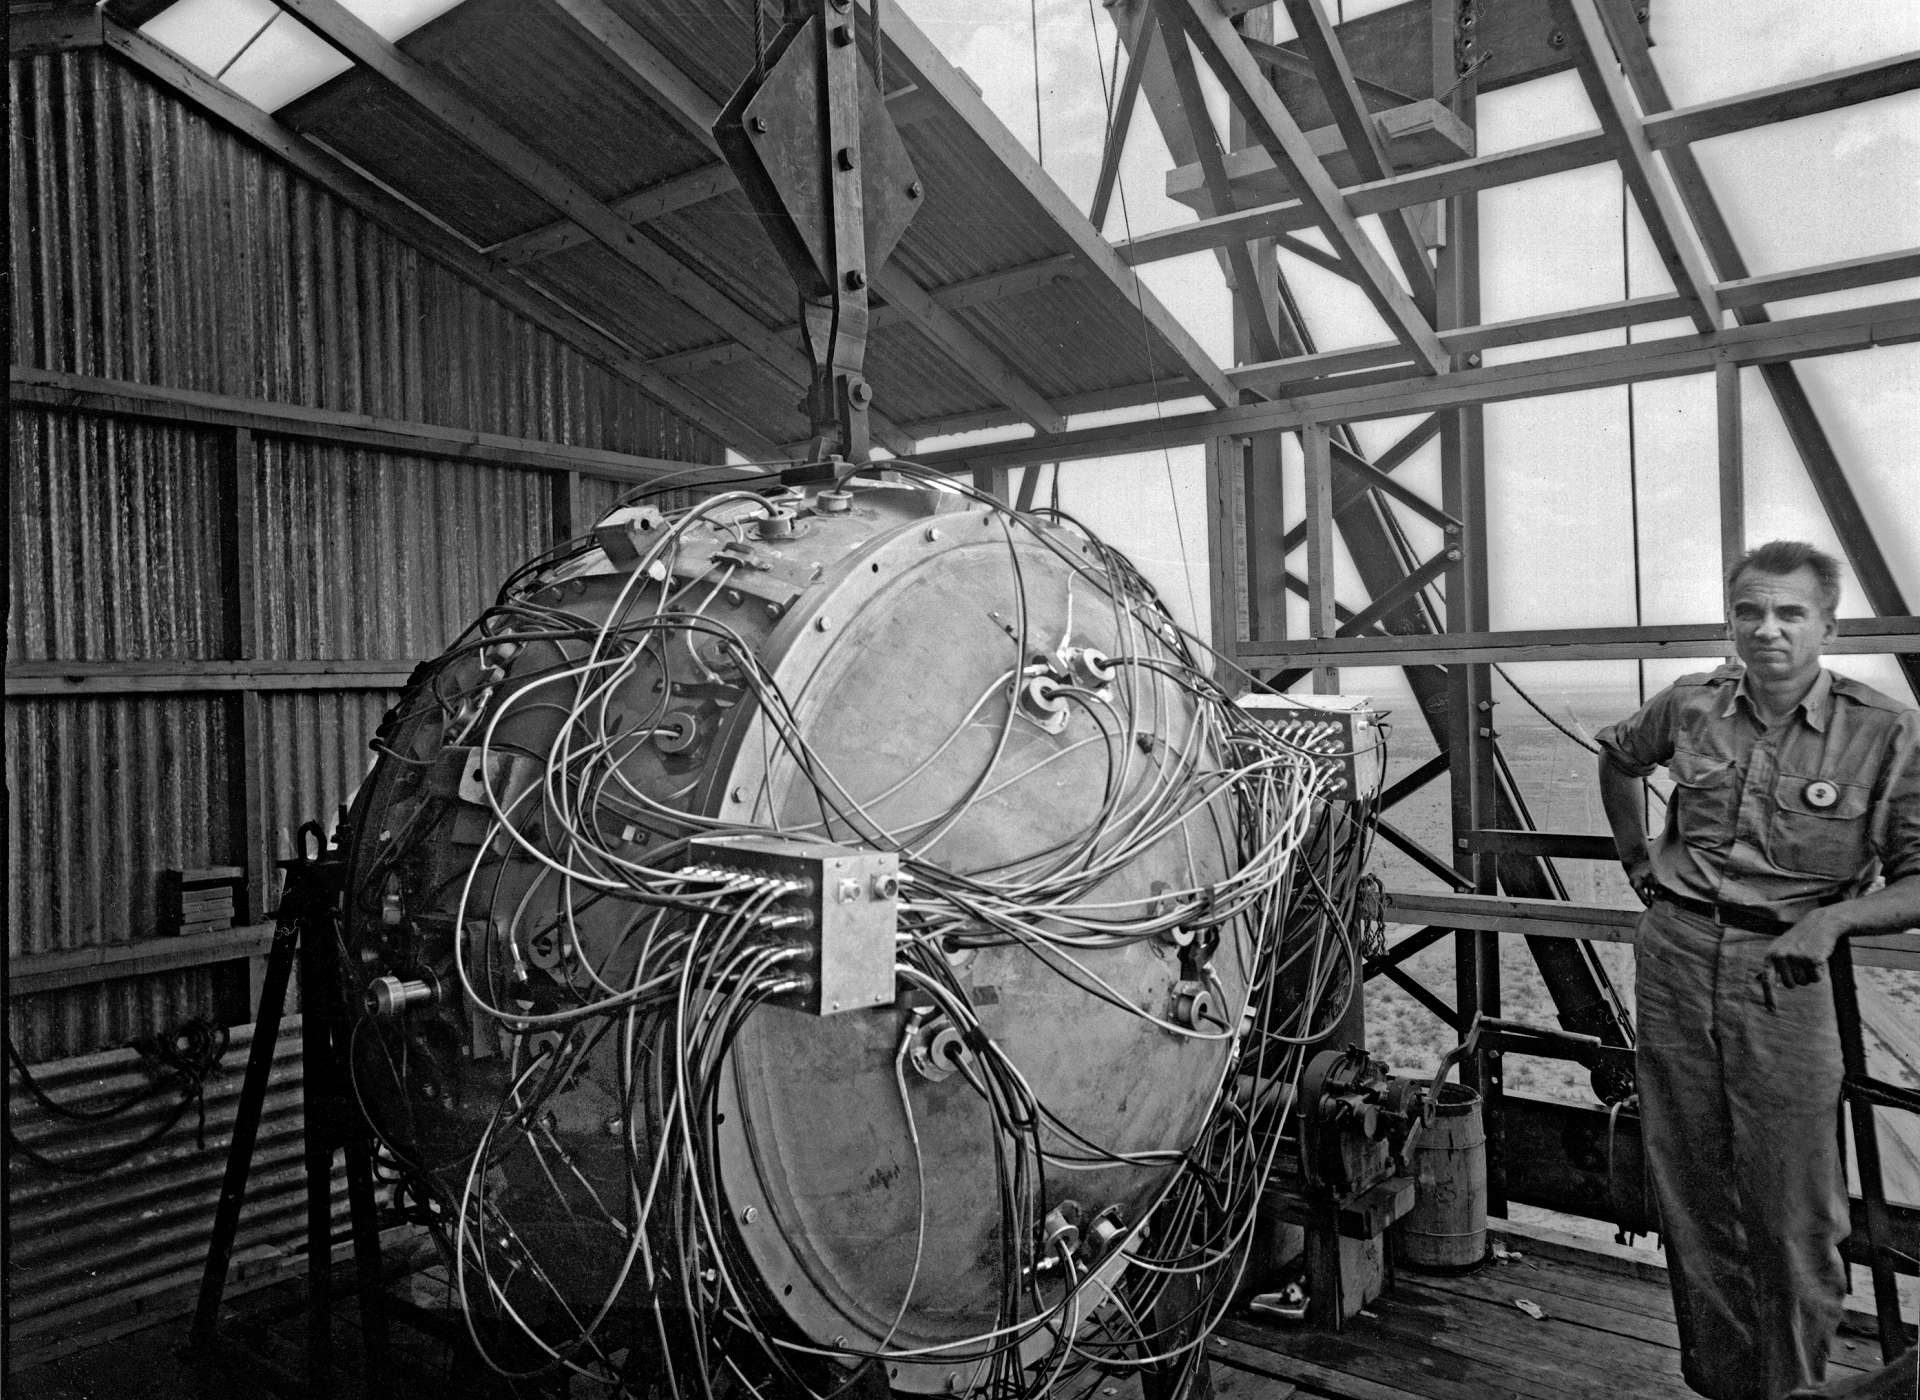 Gadget before Trinity Test, 1945.